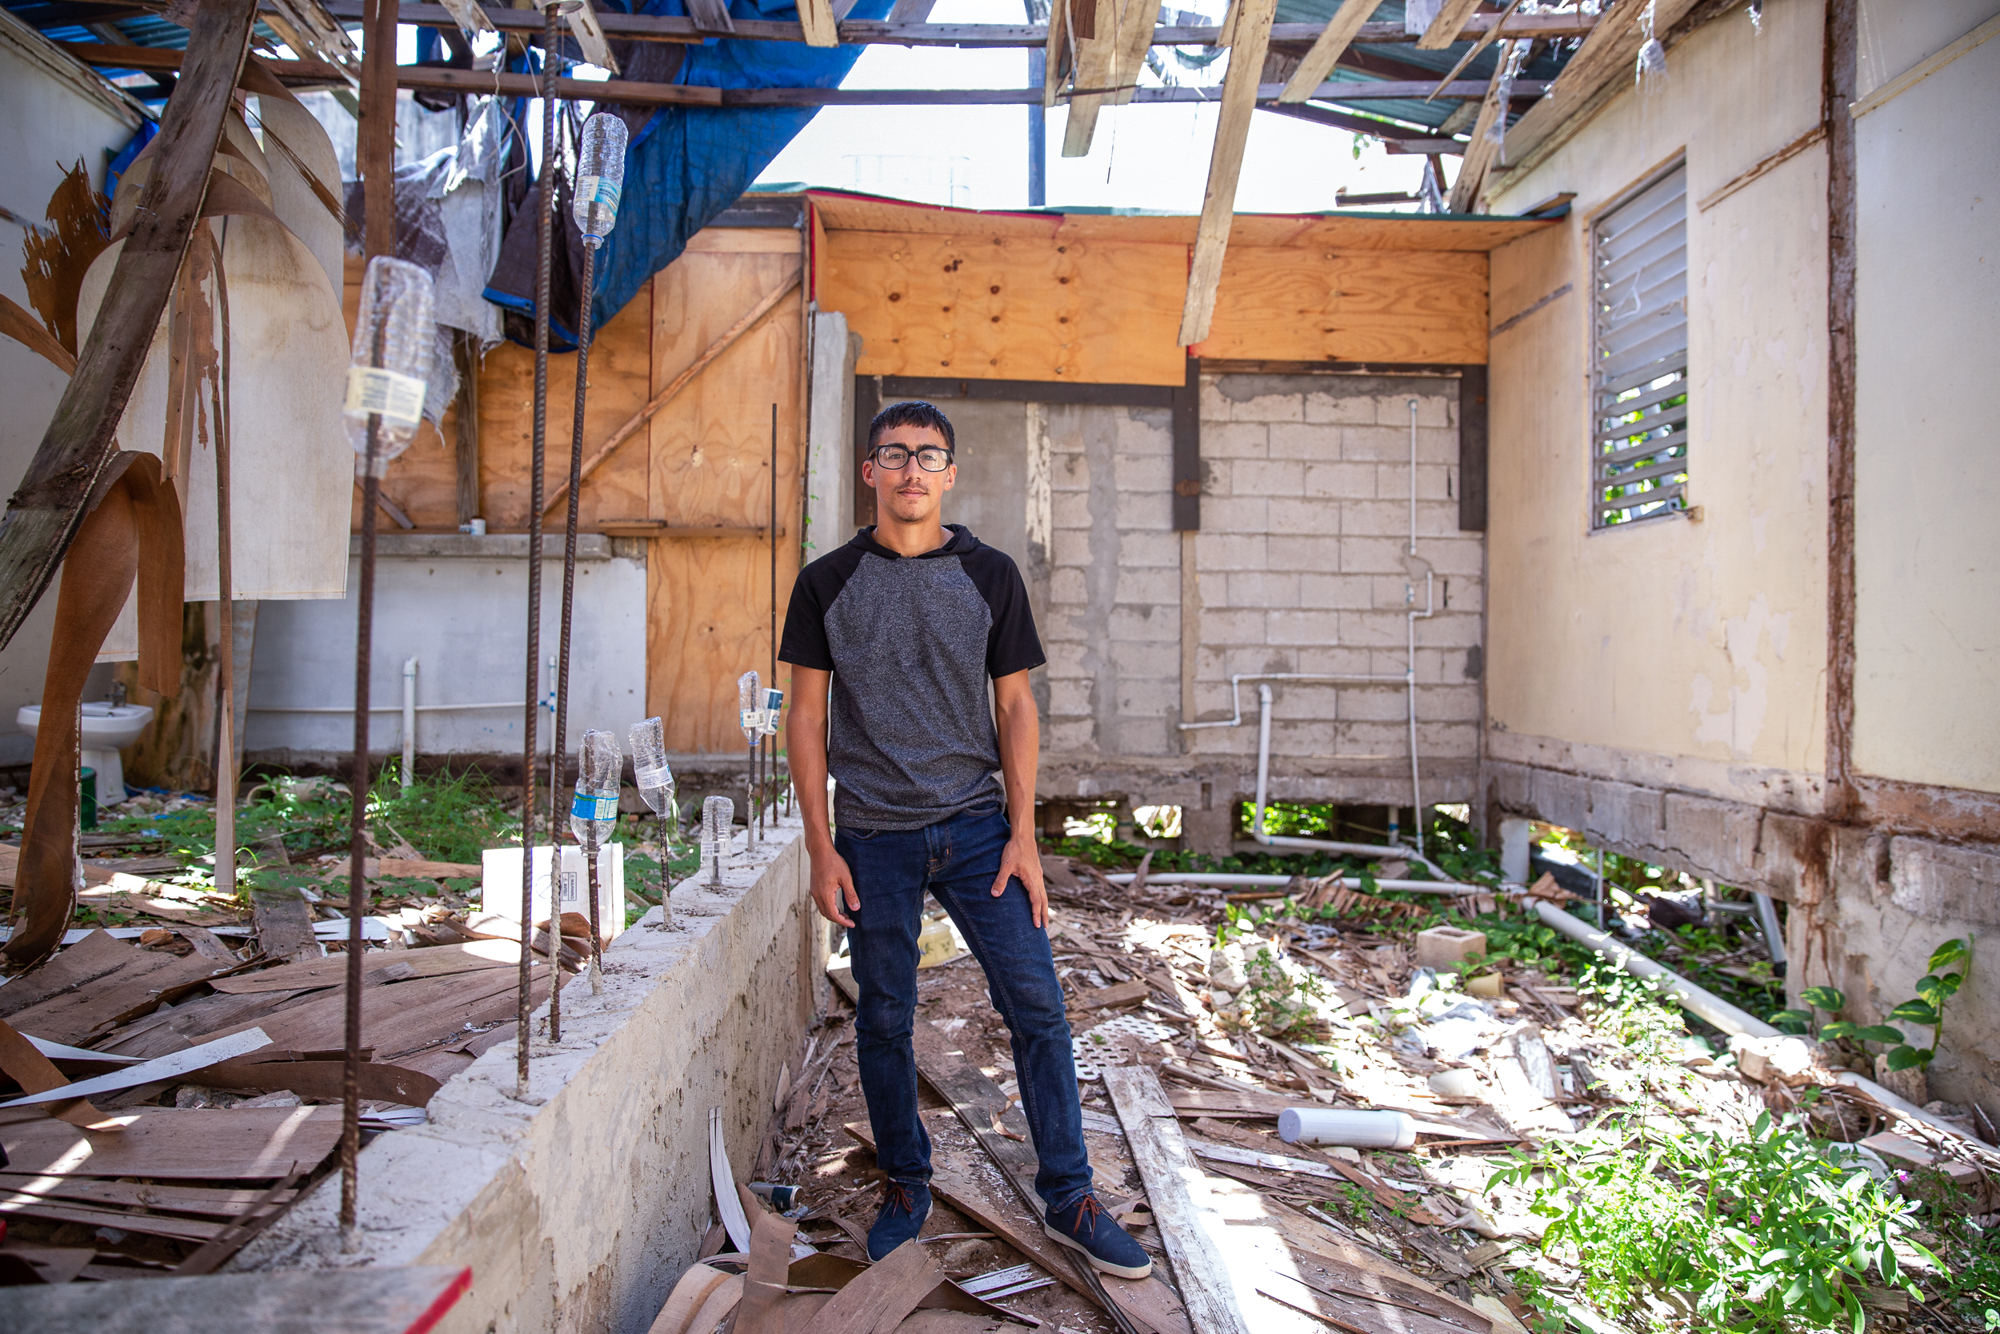 Ángel Morales Jr. - Ángel Morales Jr. turned 18 in September 2017, three days after Hurricane Maria destroyed his family's home in Puerto Rico. Nearly two years later, the family has received little government assistance to repair their home and has had their electricity cut off due to overdue bills. (Ellen O'Brien/News21)